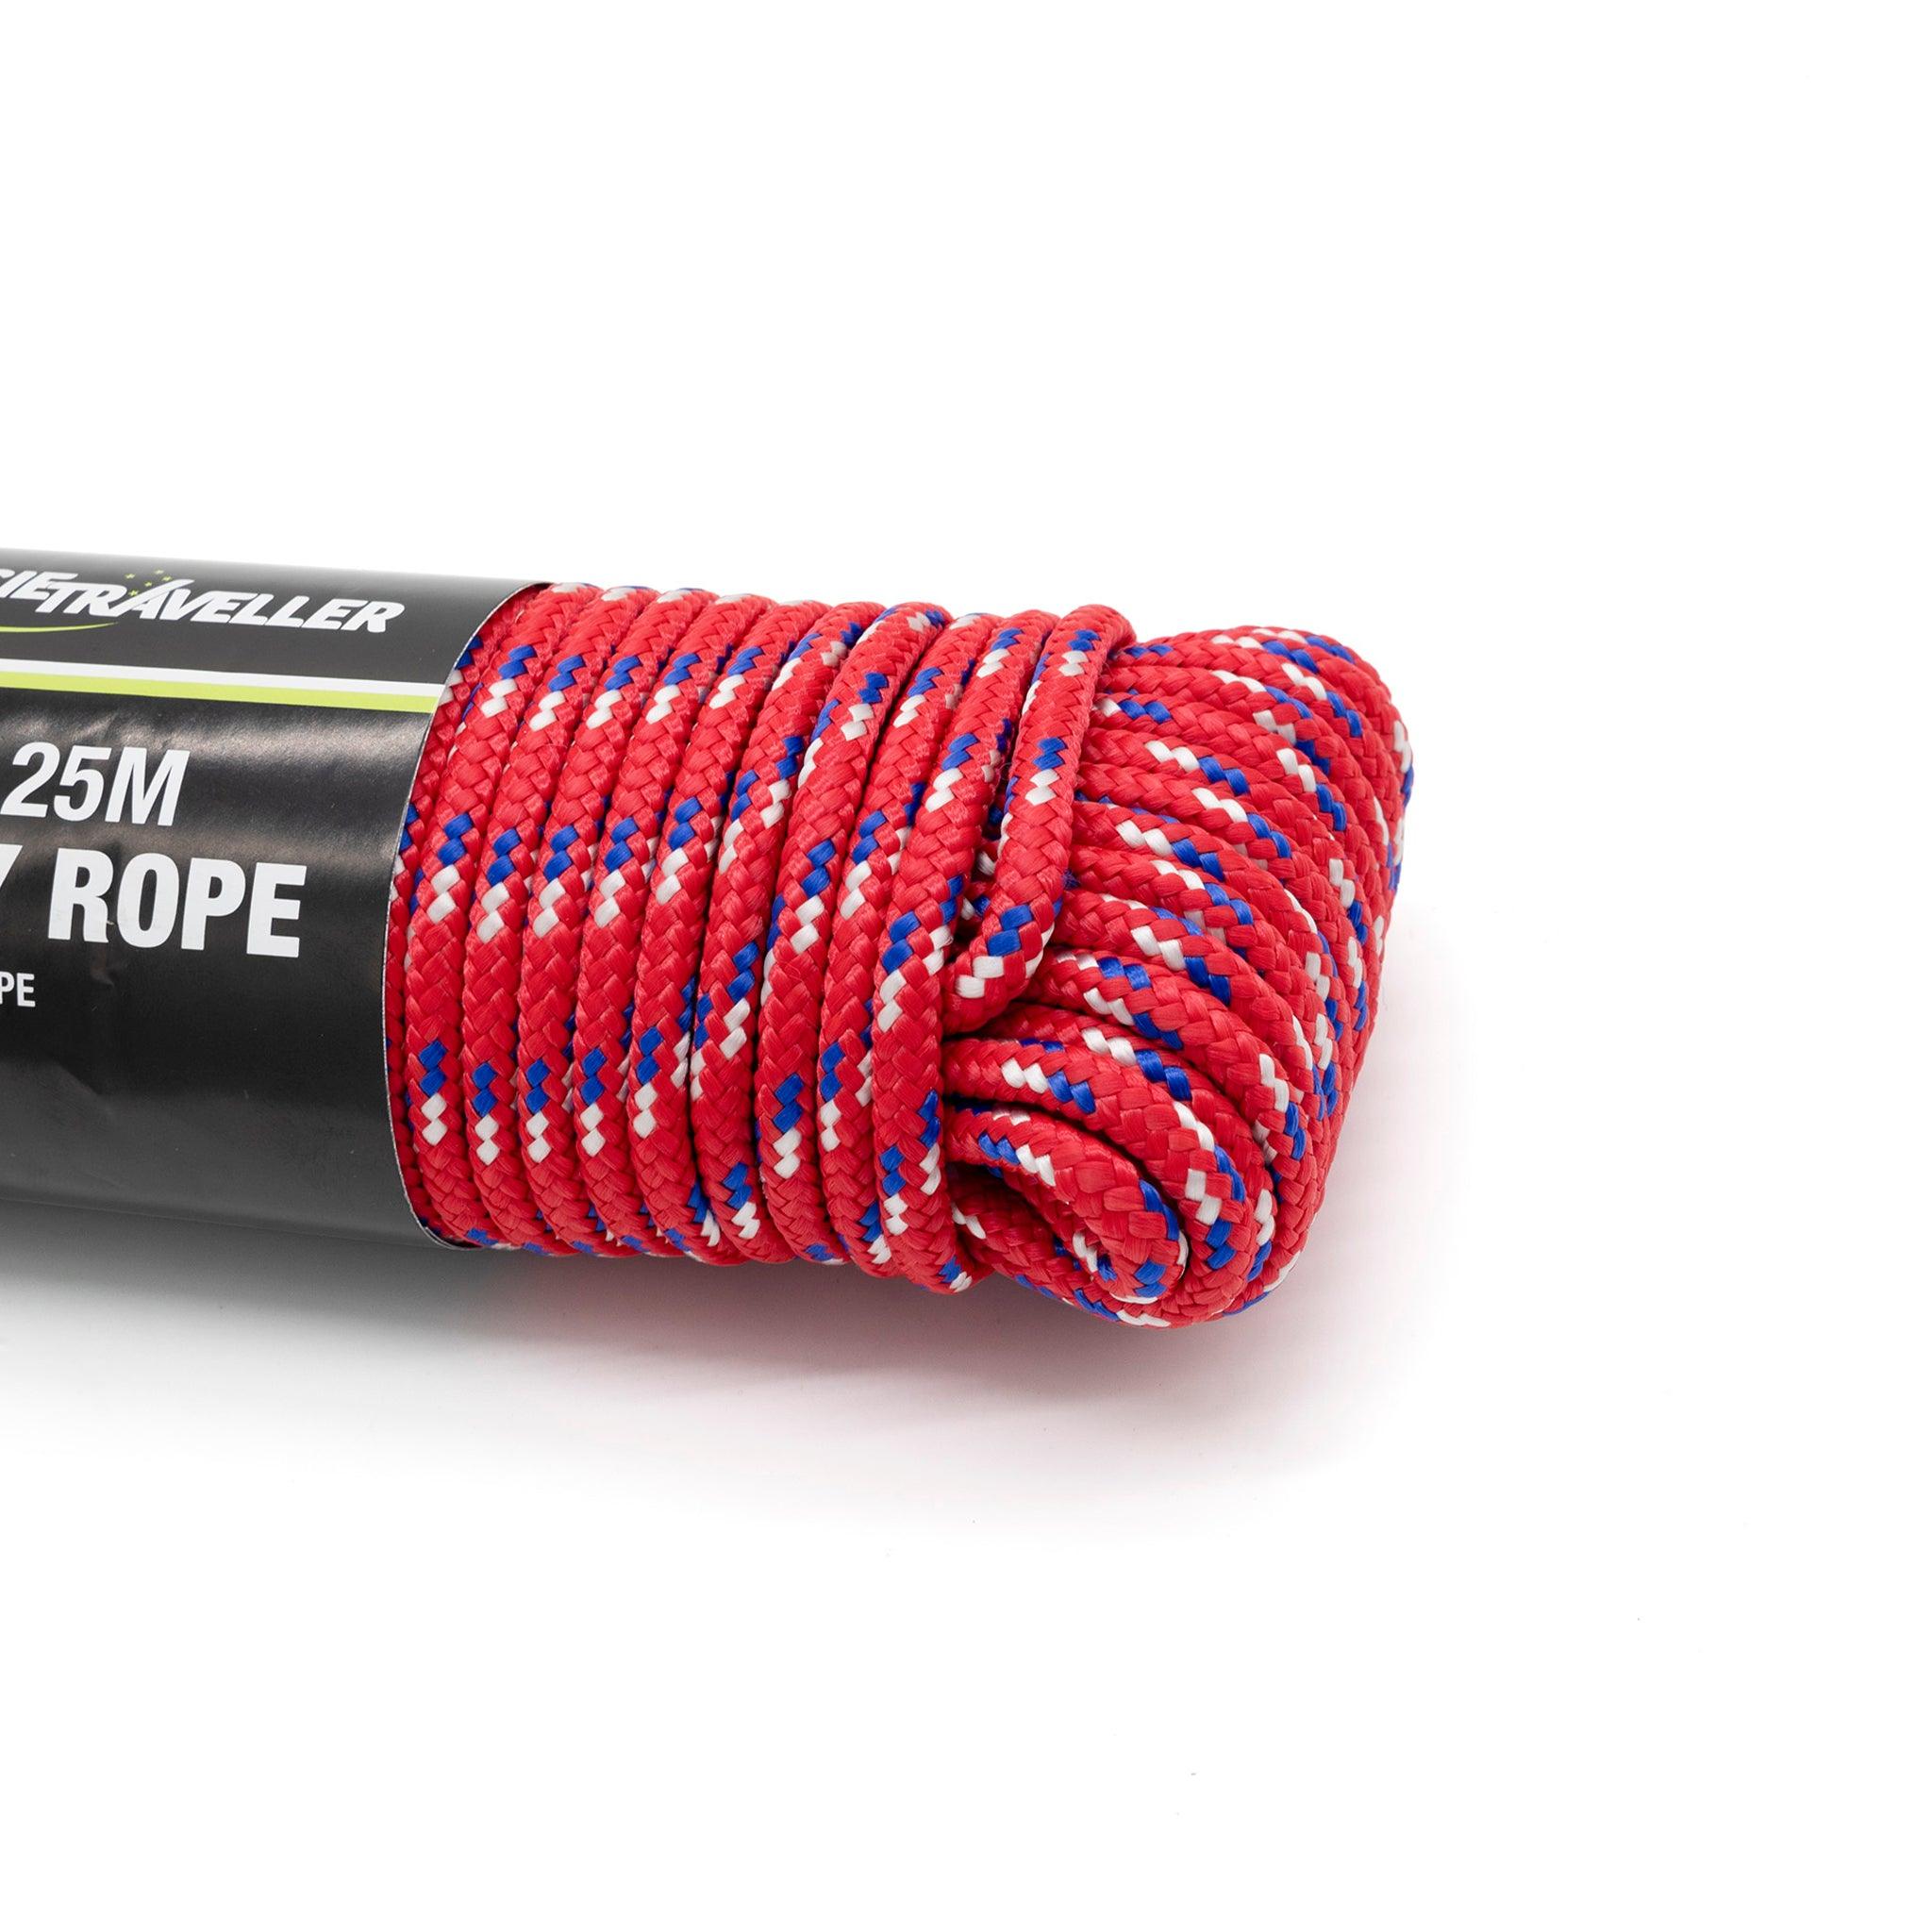 Utility Rope 6mm x 25m - Red @ A$12.99